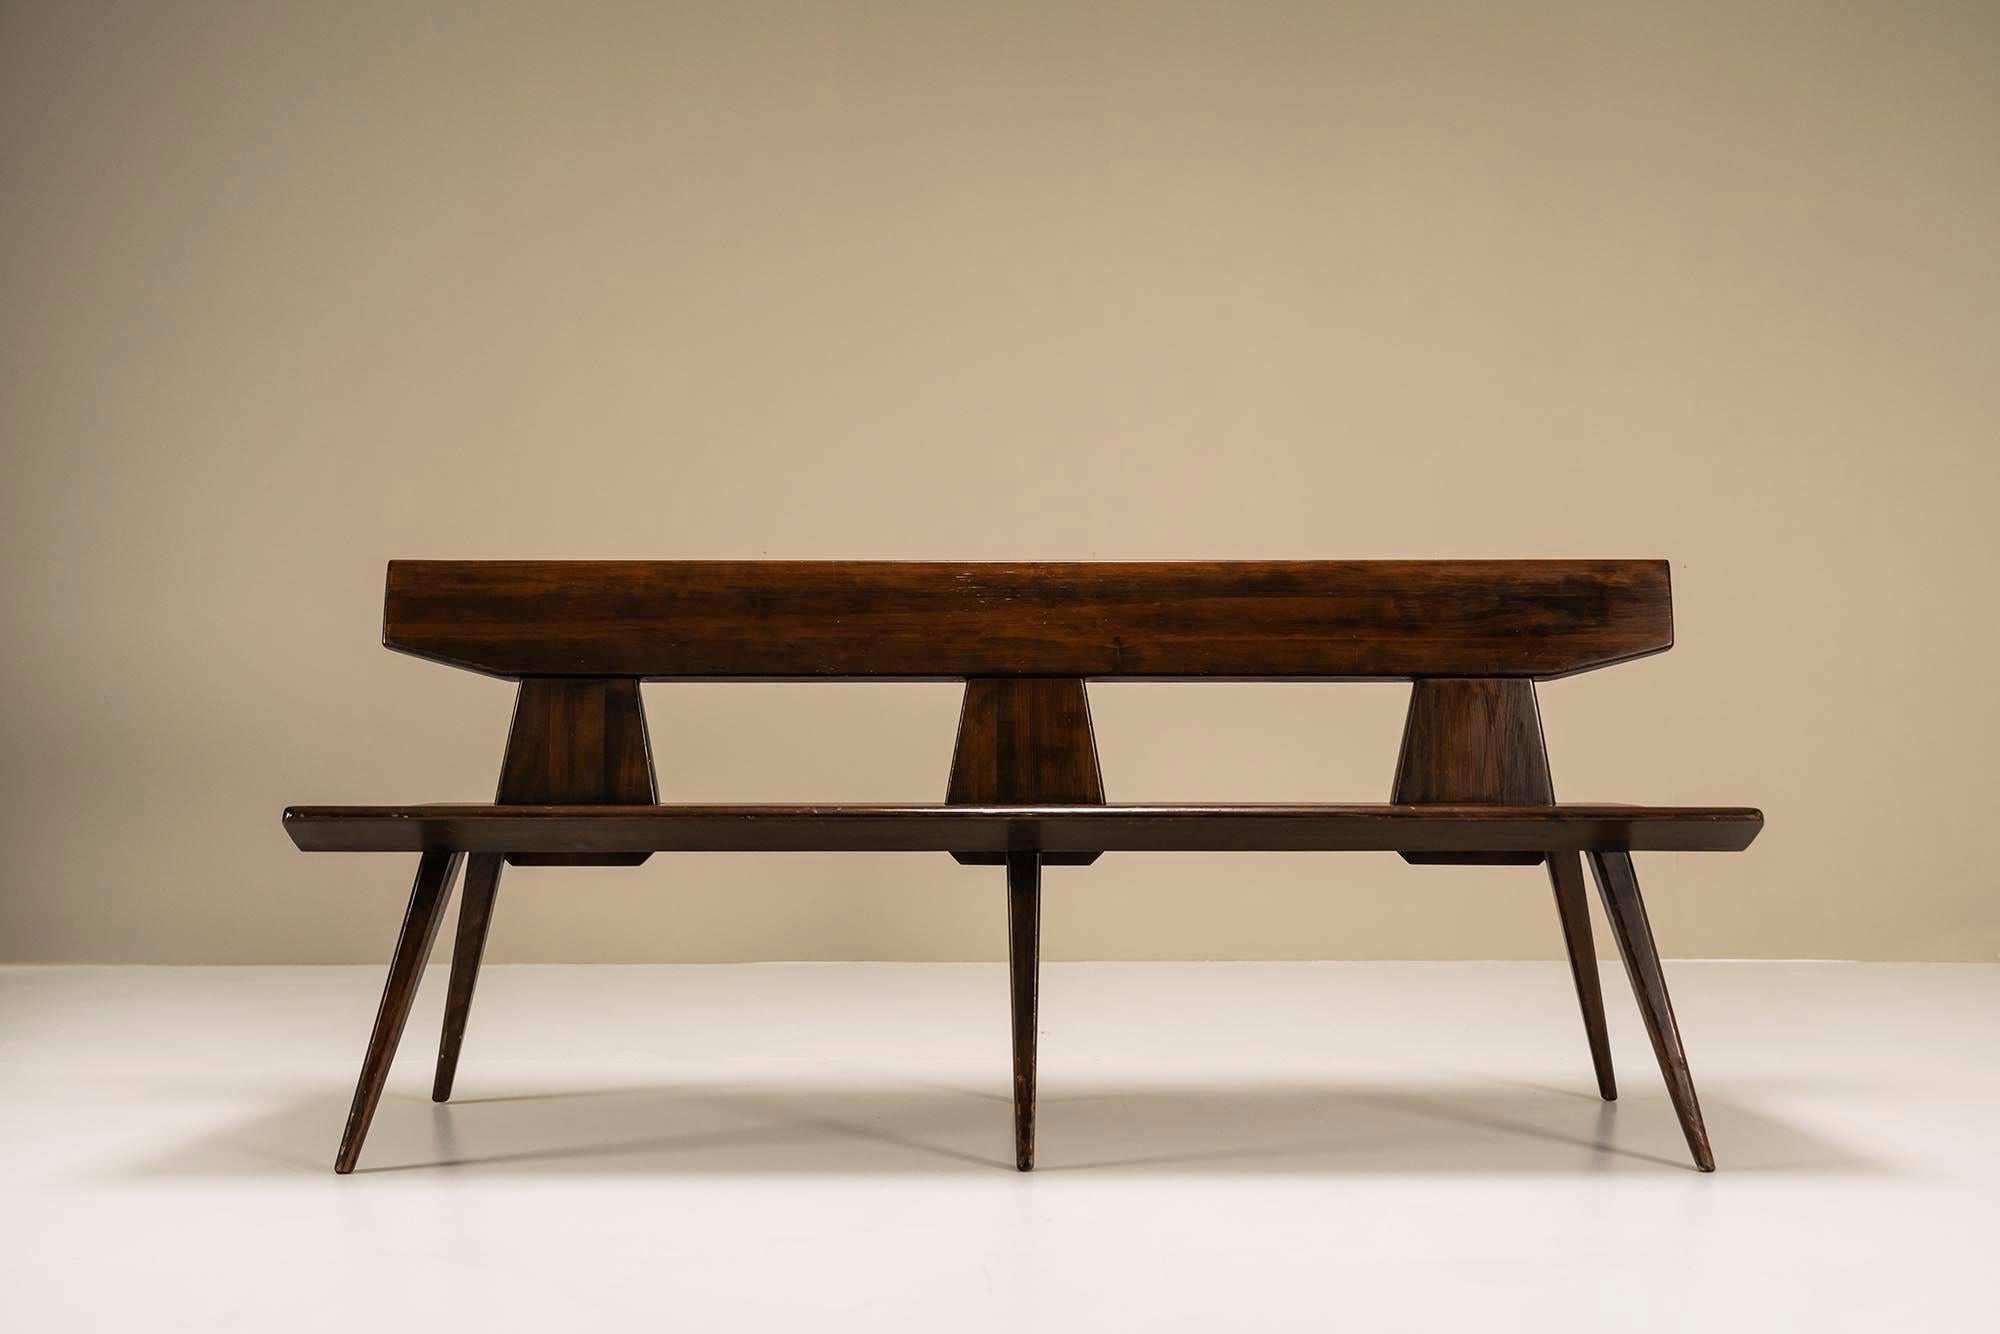 This solid dark stained pine 1960s bench is best described as a minimalist work by the Danish designer Jacob Kielland- Brandt. Its geometrical shape and form clearly evoke a pure visual response. We can also speak of a very honest design that was